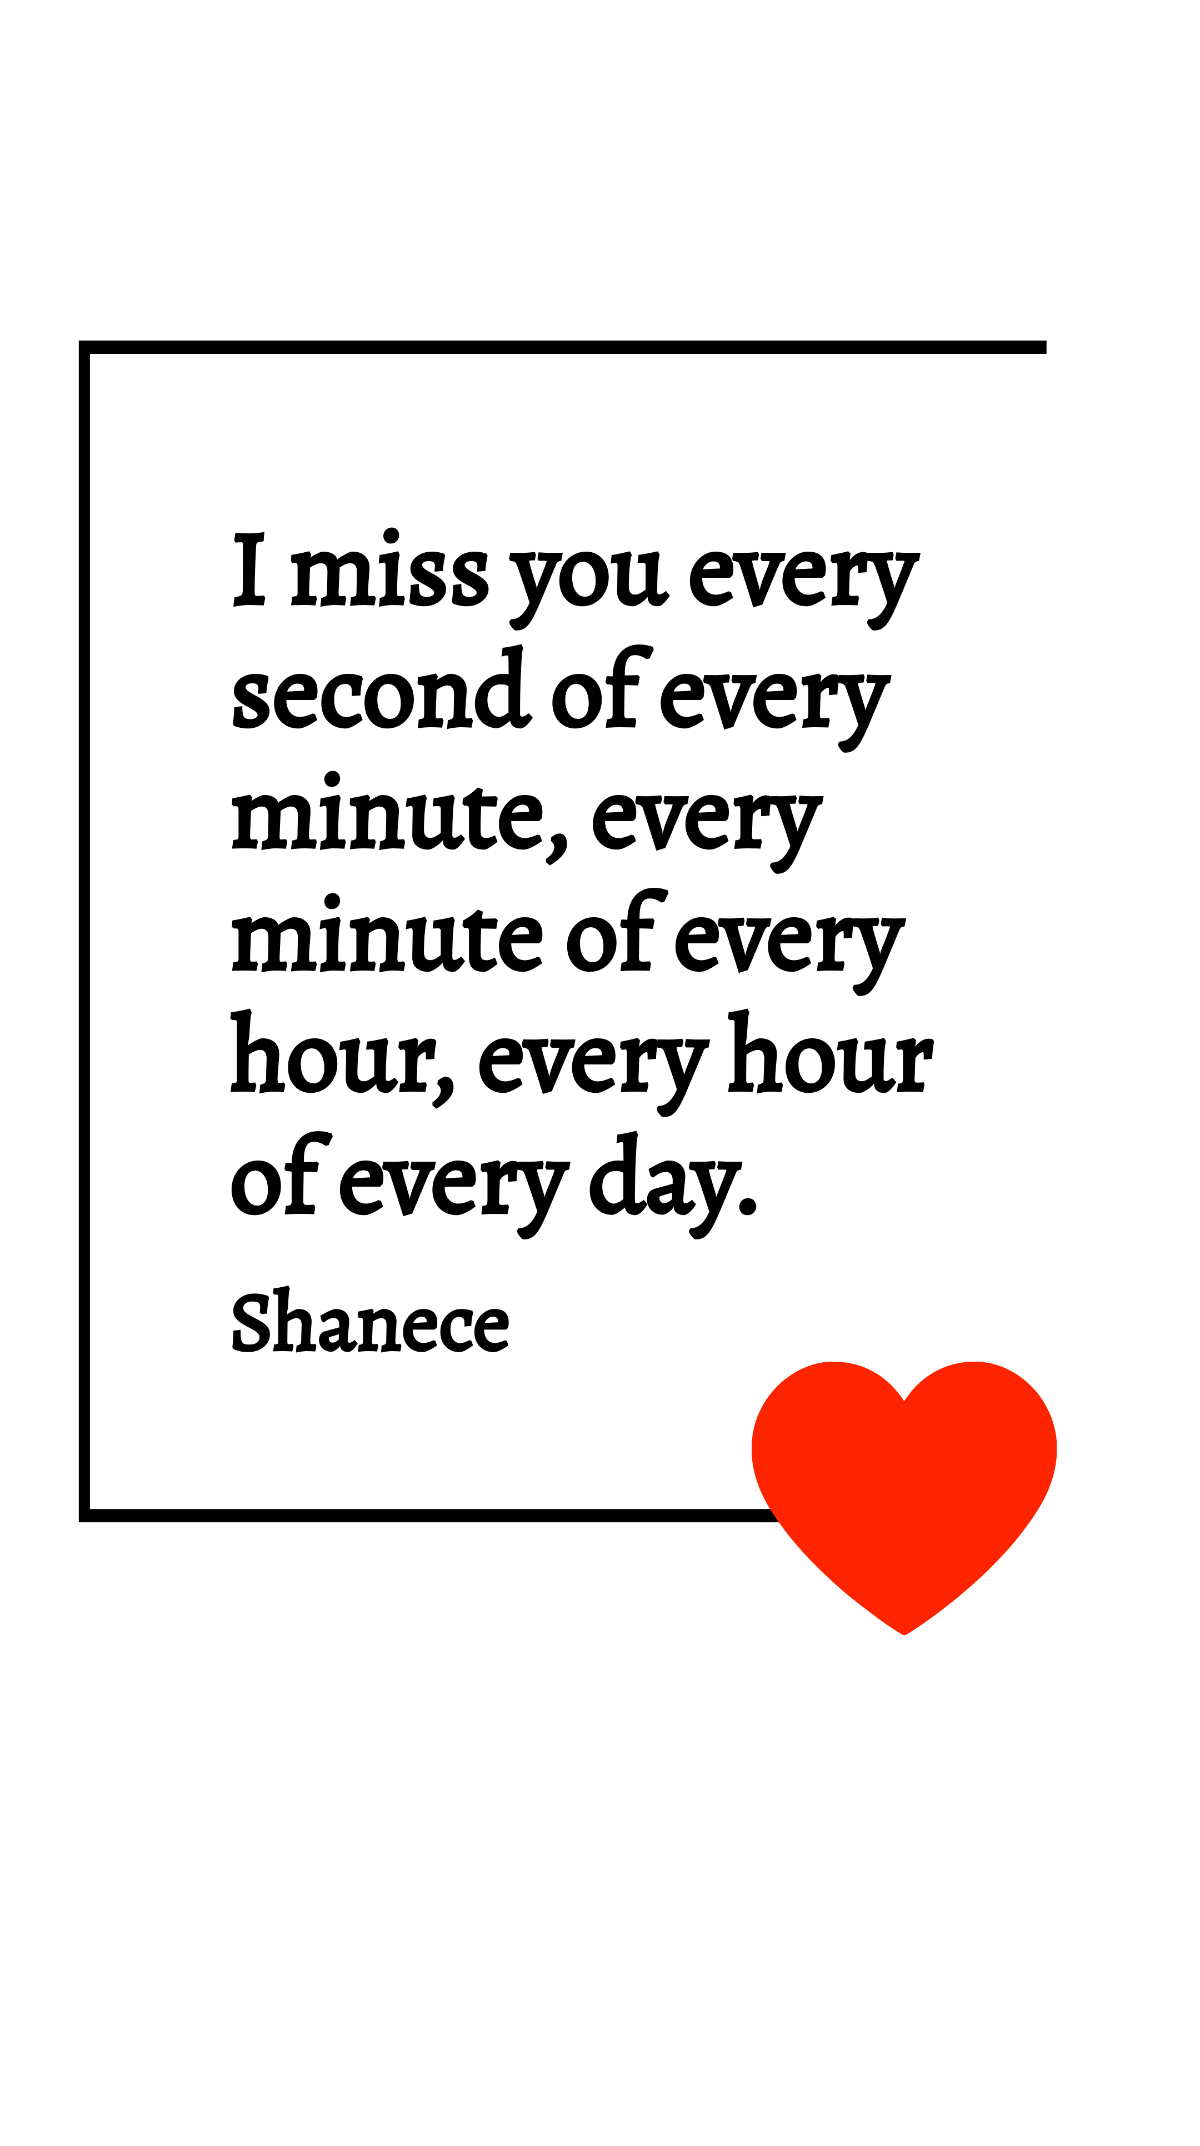 Shanece - I miss you every second of every minute, every minute of every hour, every hour of every day.